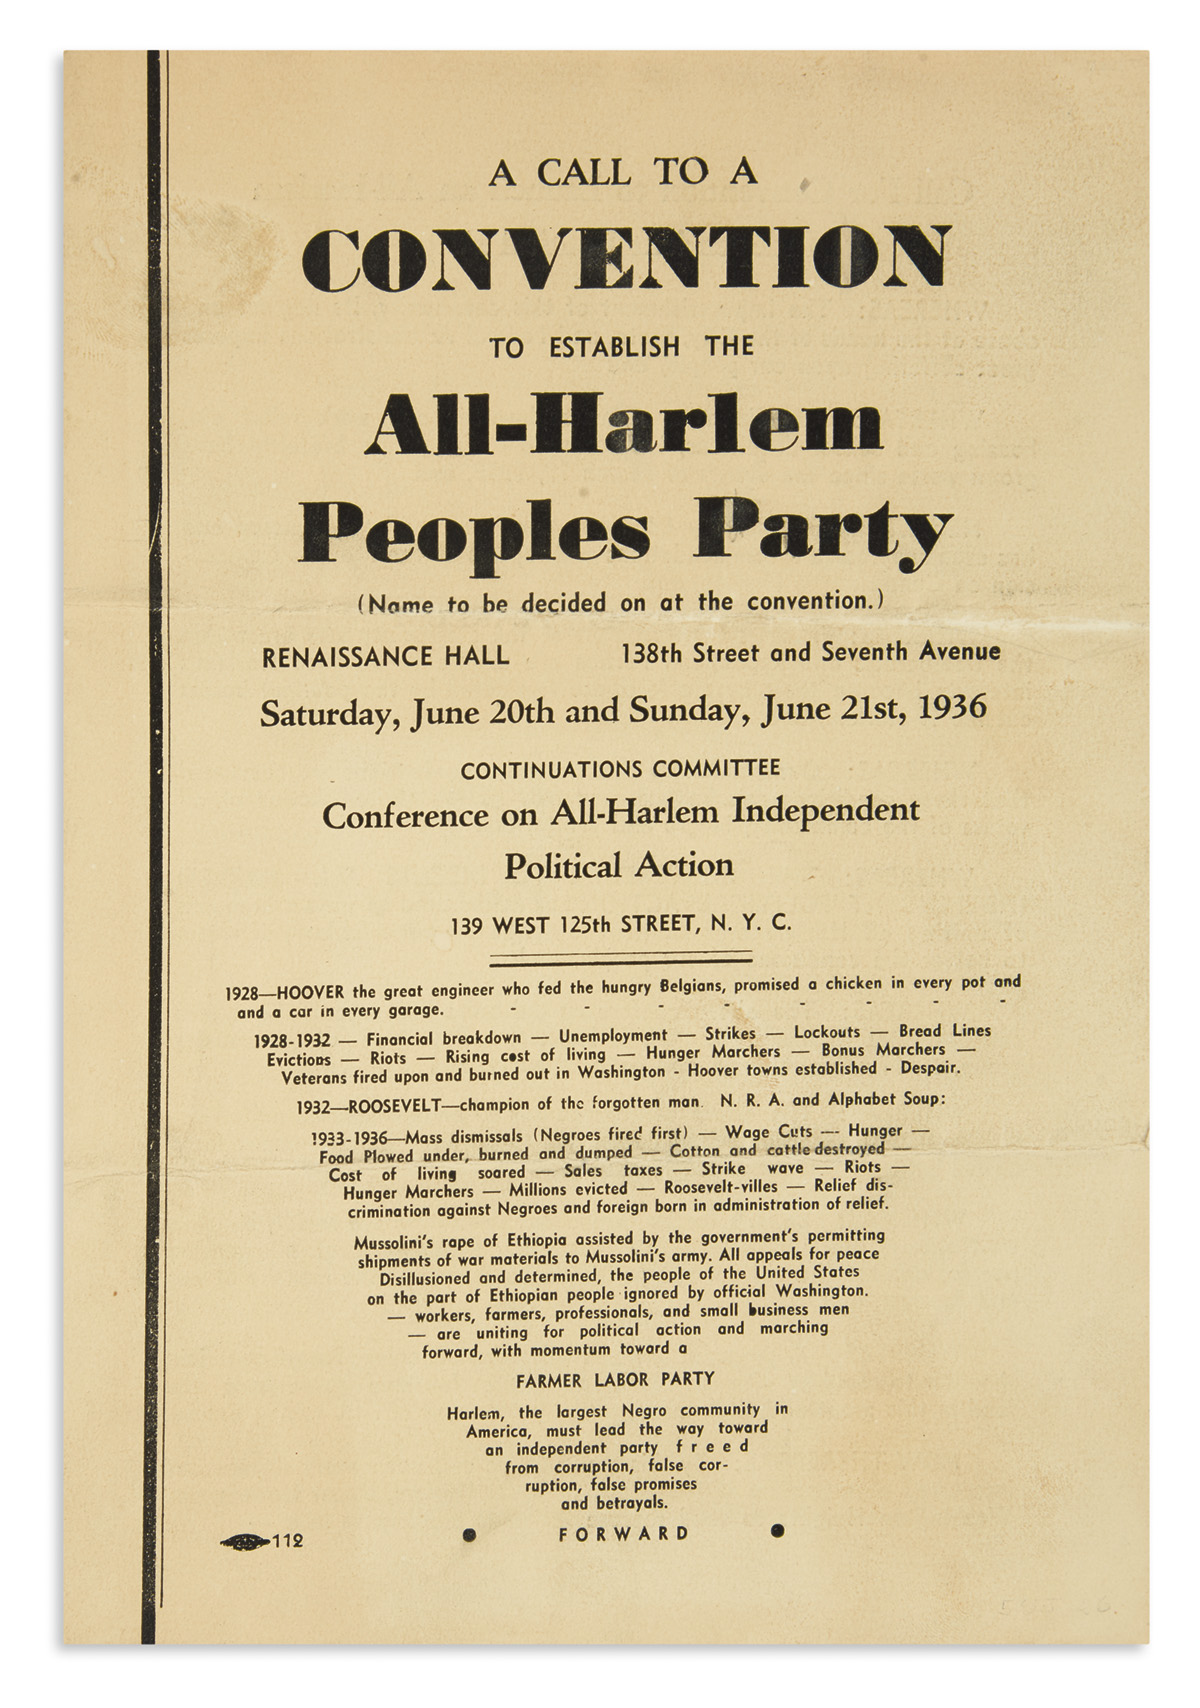 (POLITICS.) A Call to a Convention to Establish the All-Harlem Peoples Party.